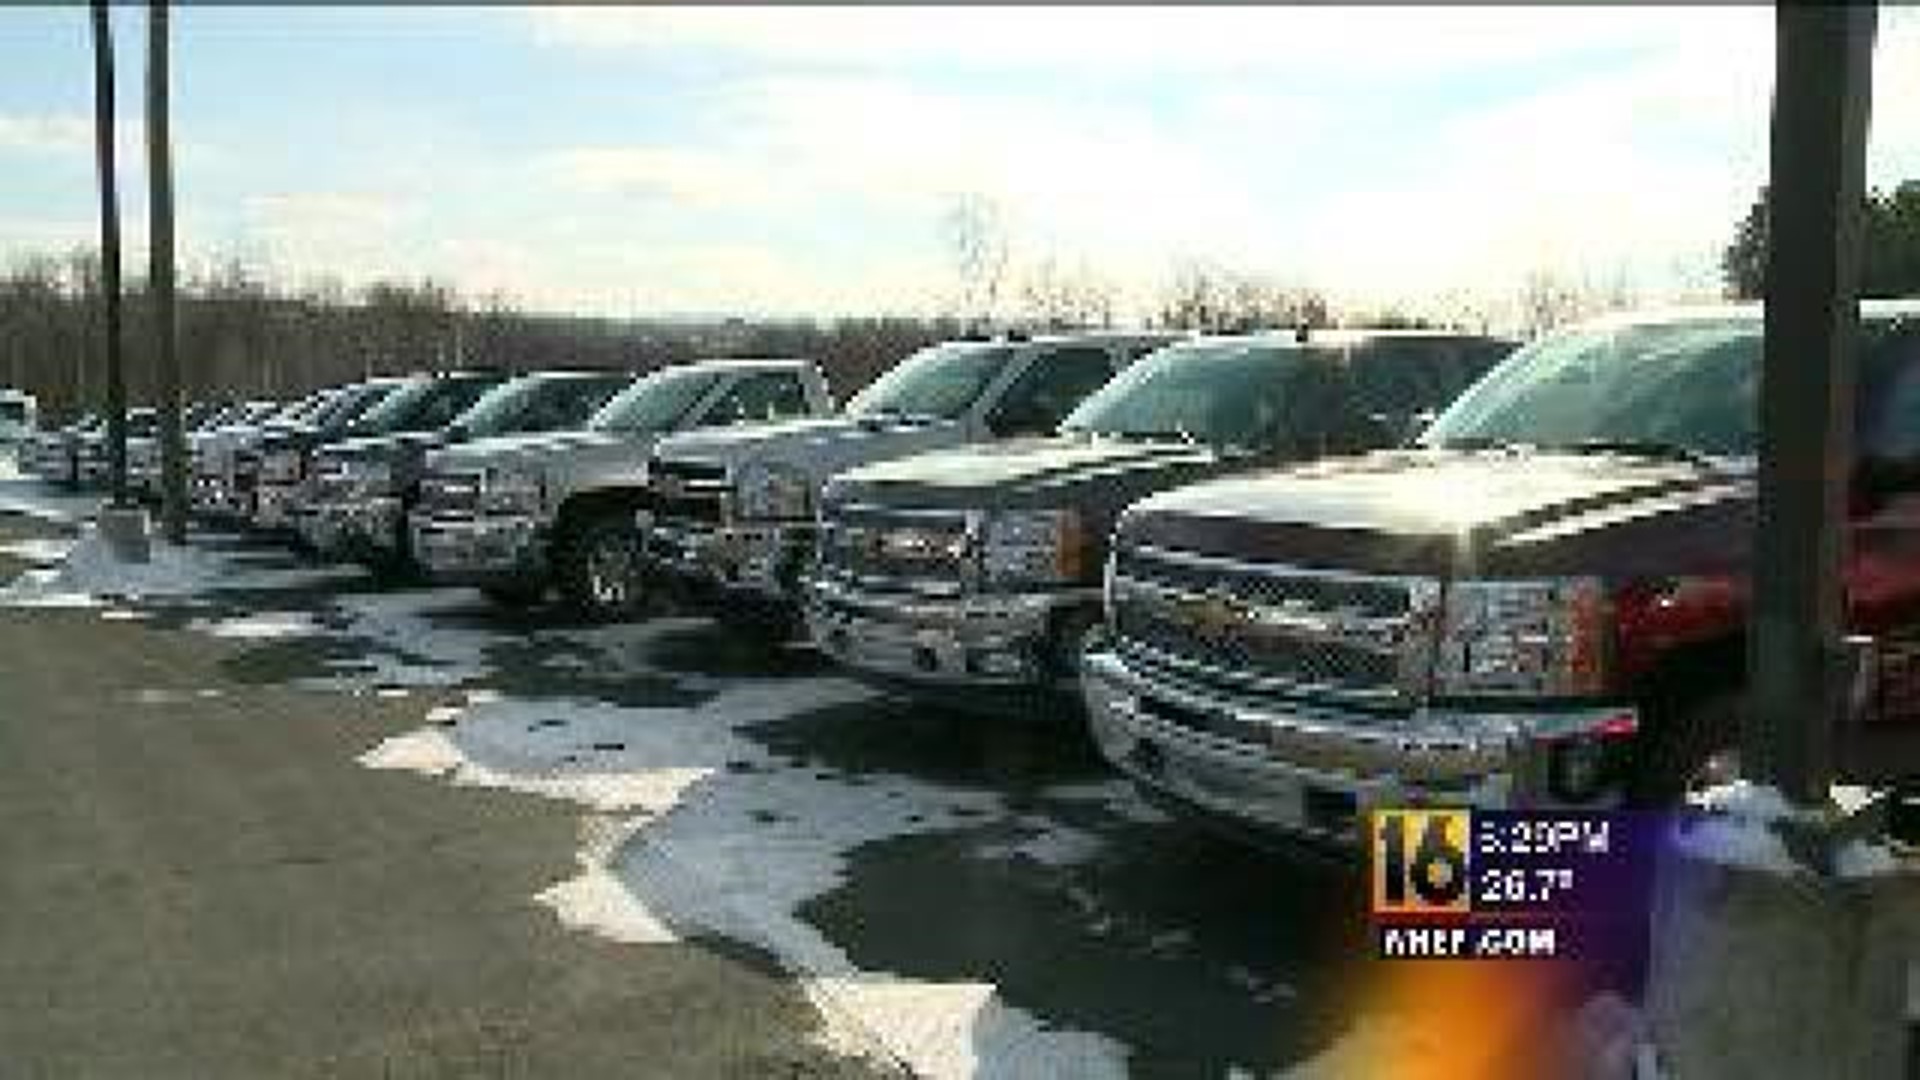 Local Car Dealers See a Boost in Sales